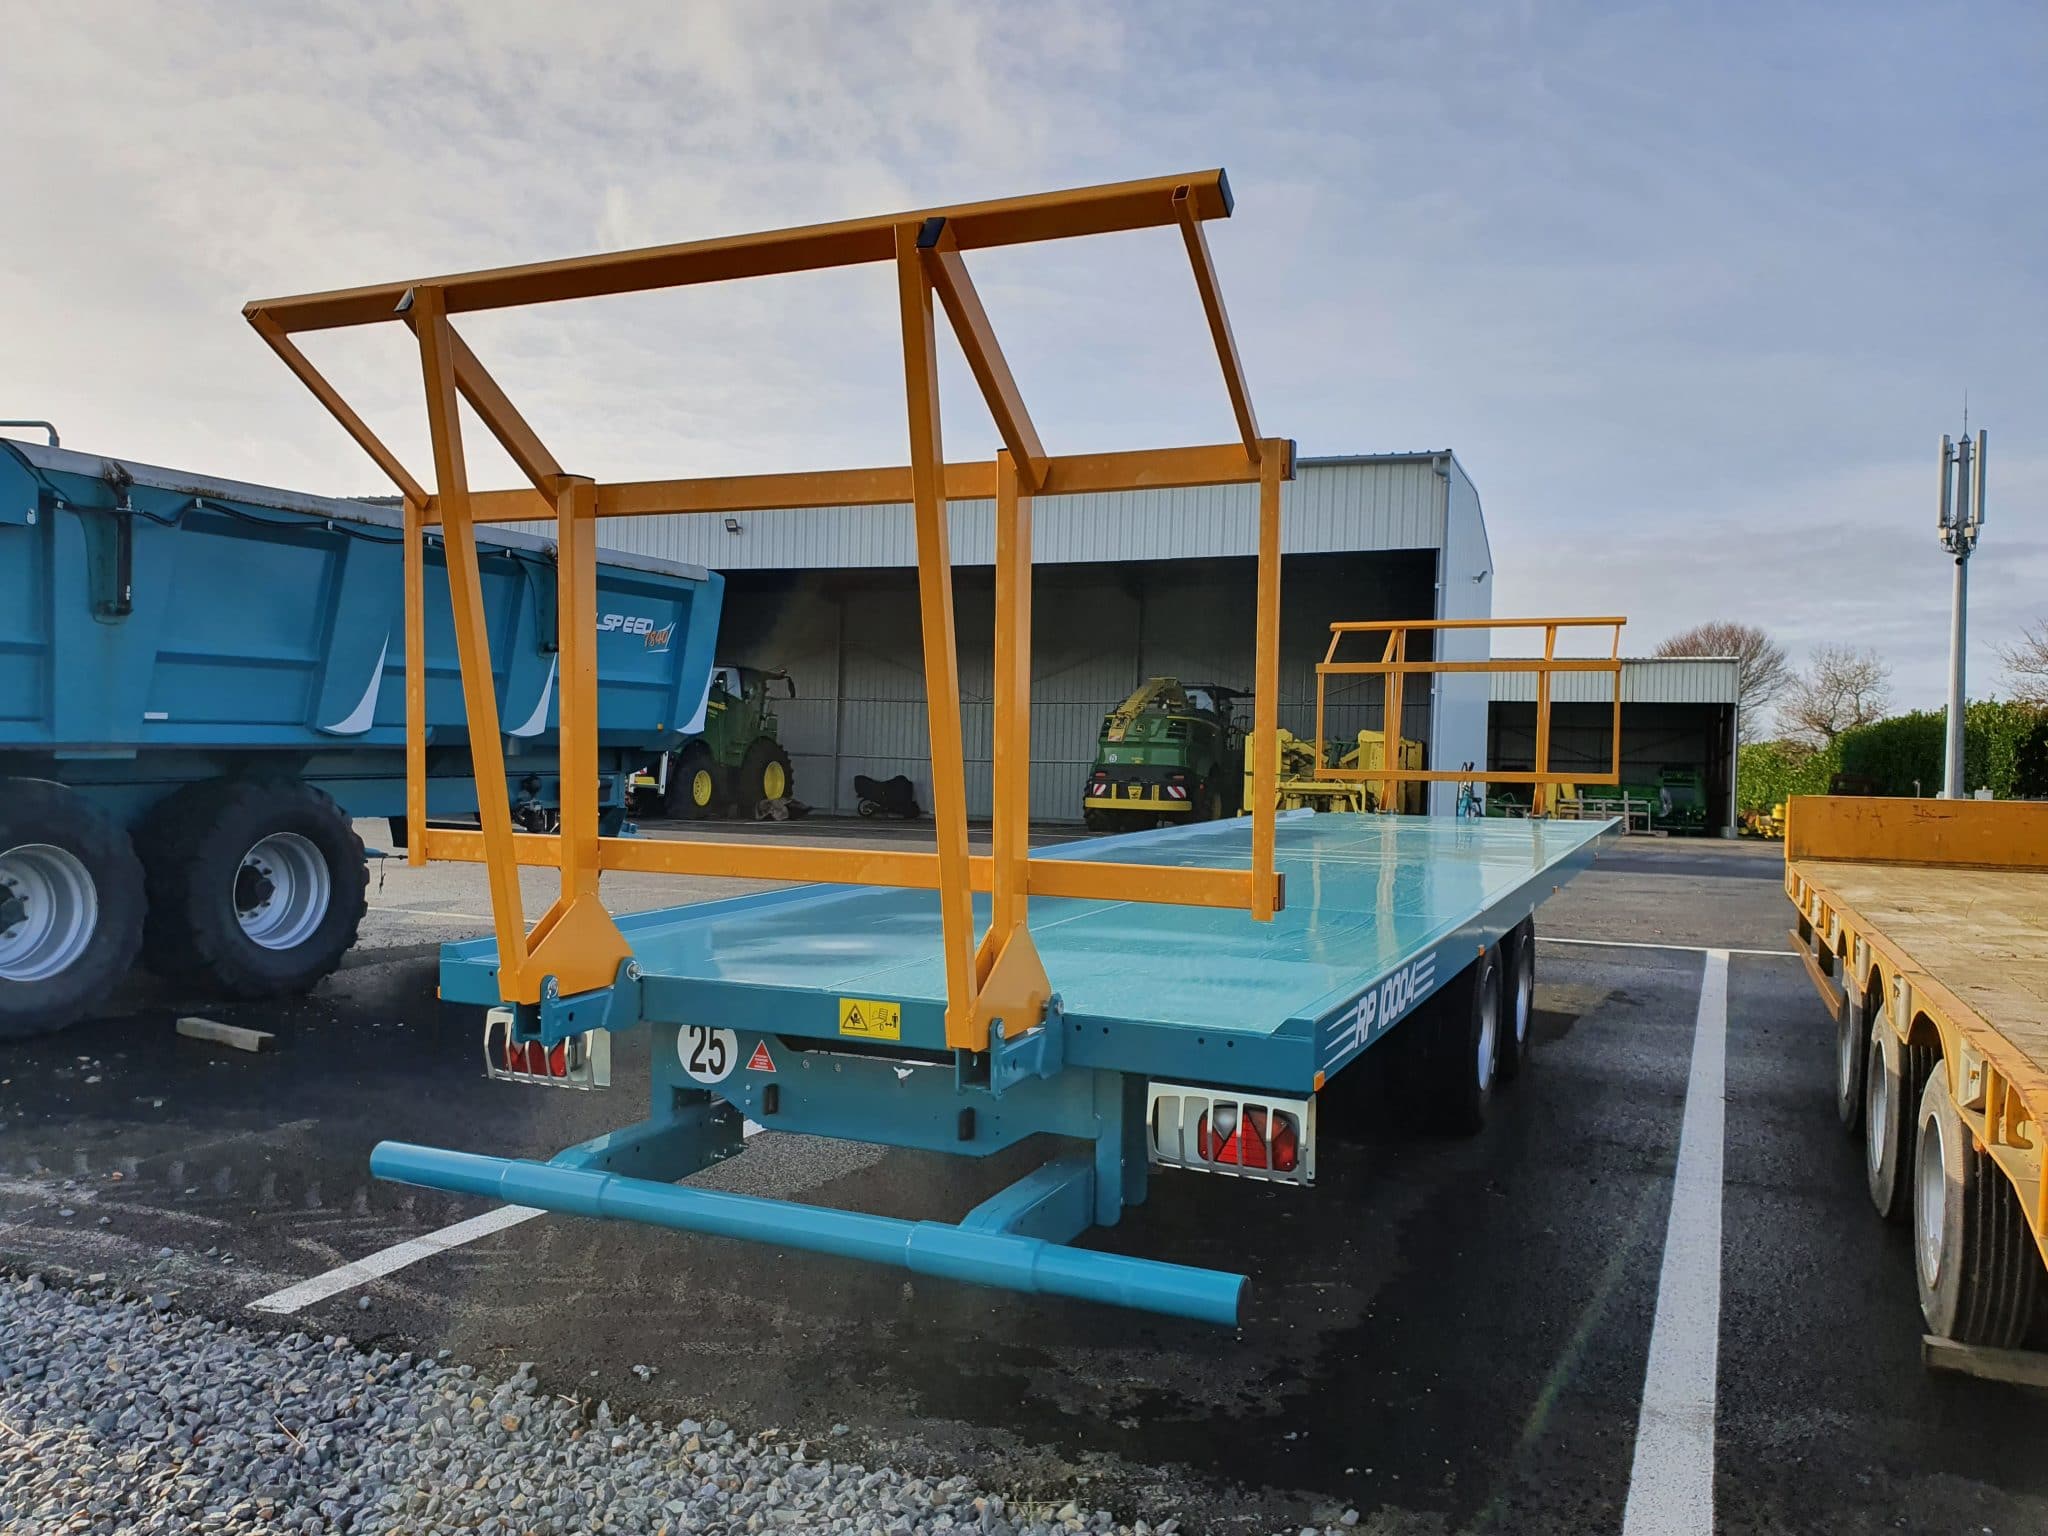 Flat bed trailers